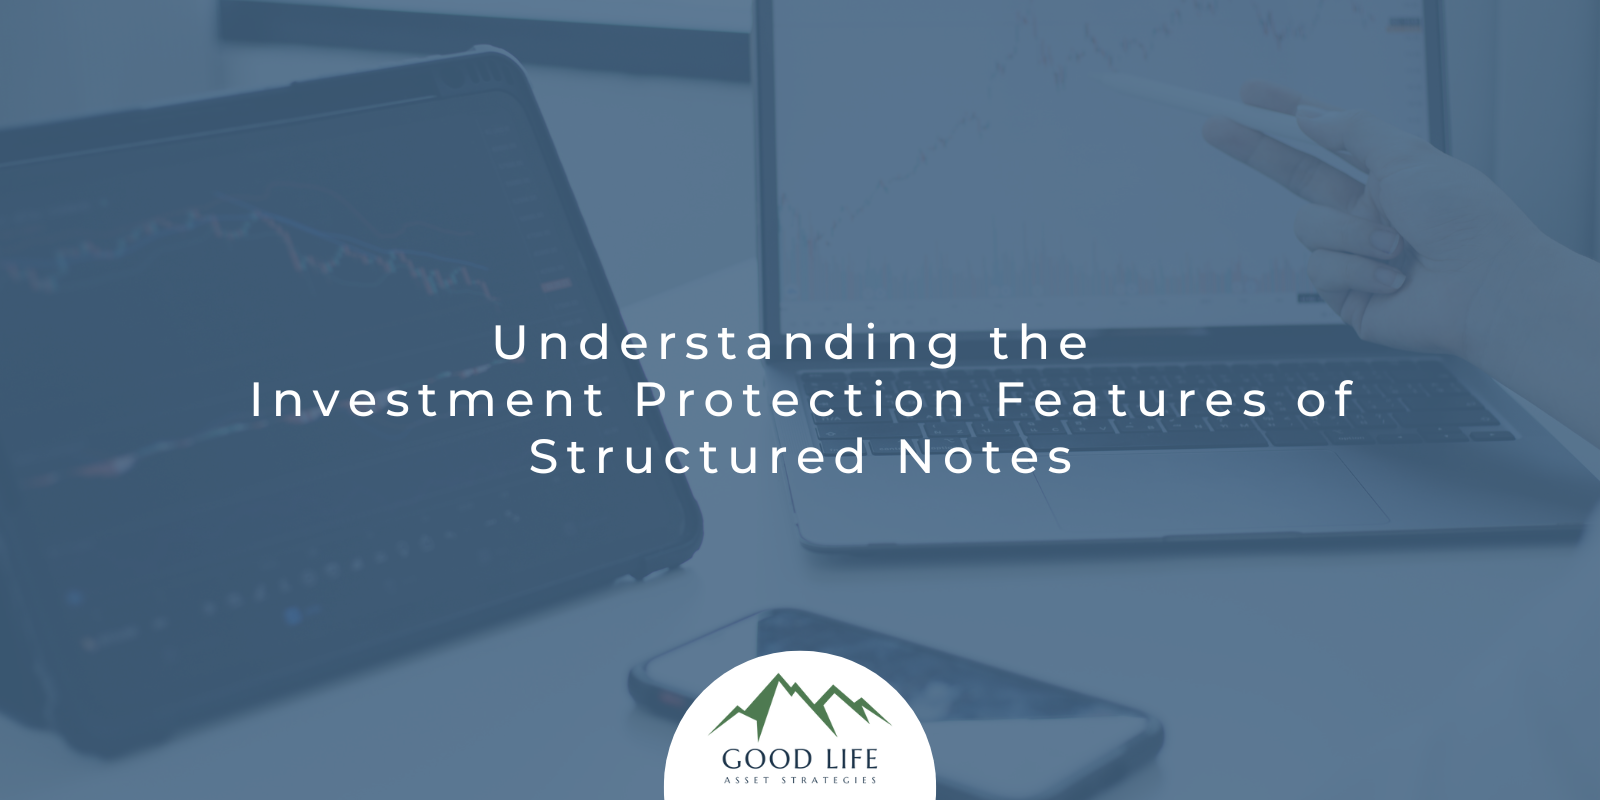 Understanding the Investment Protection Features of Structured Notes